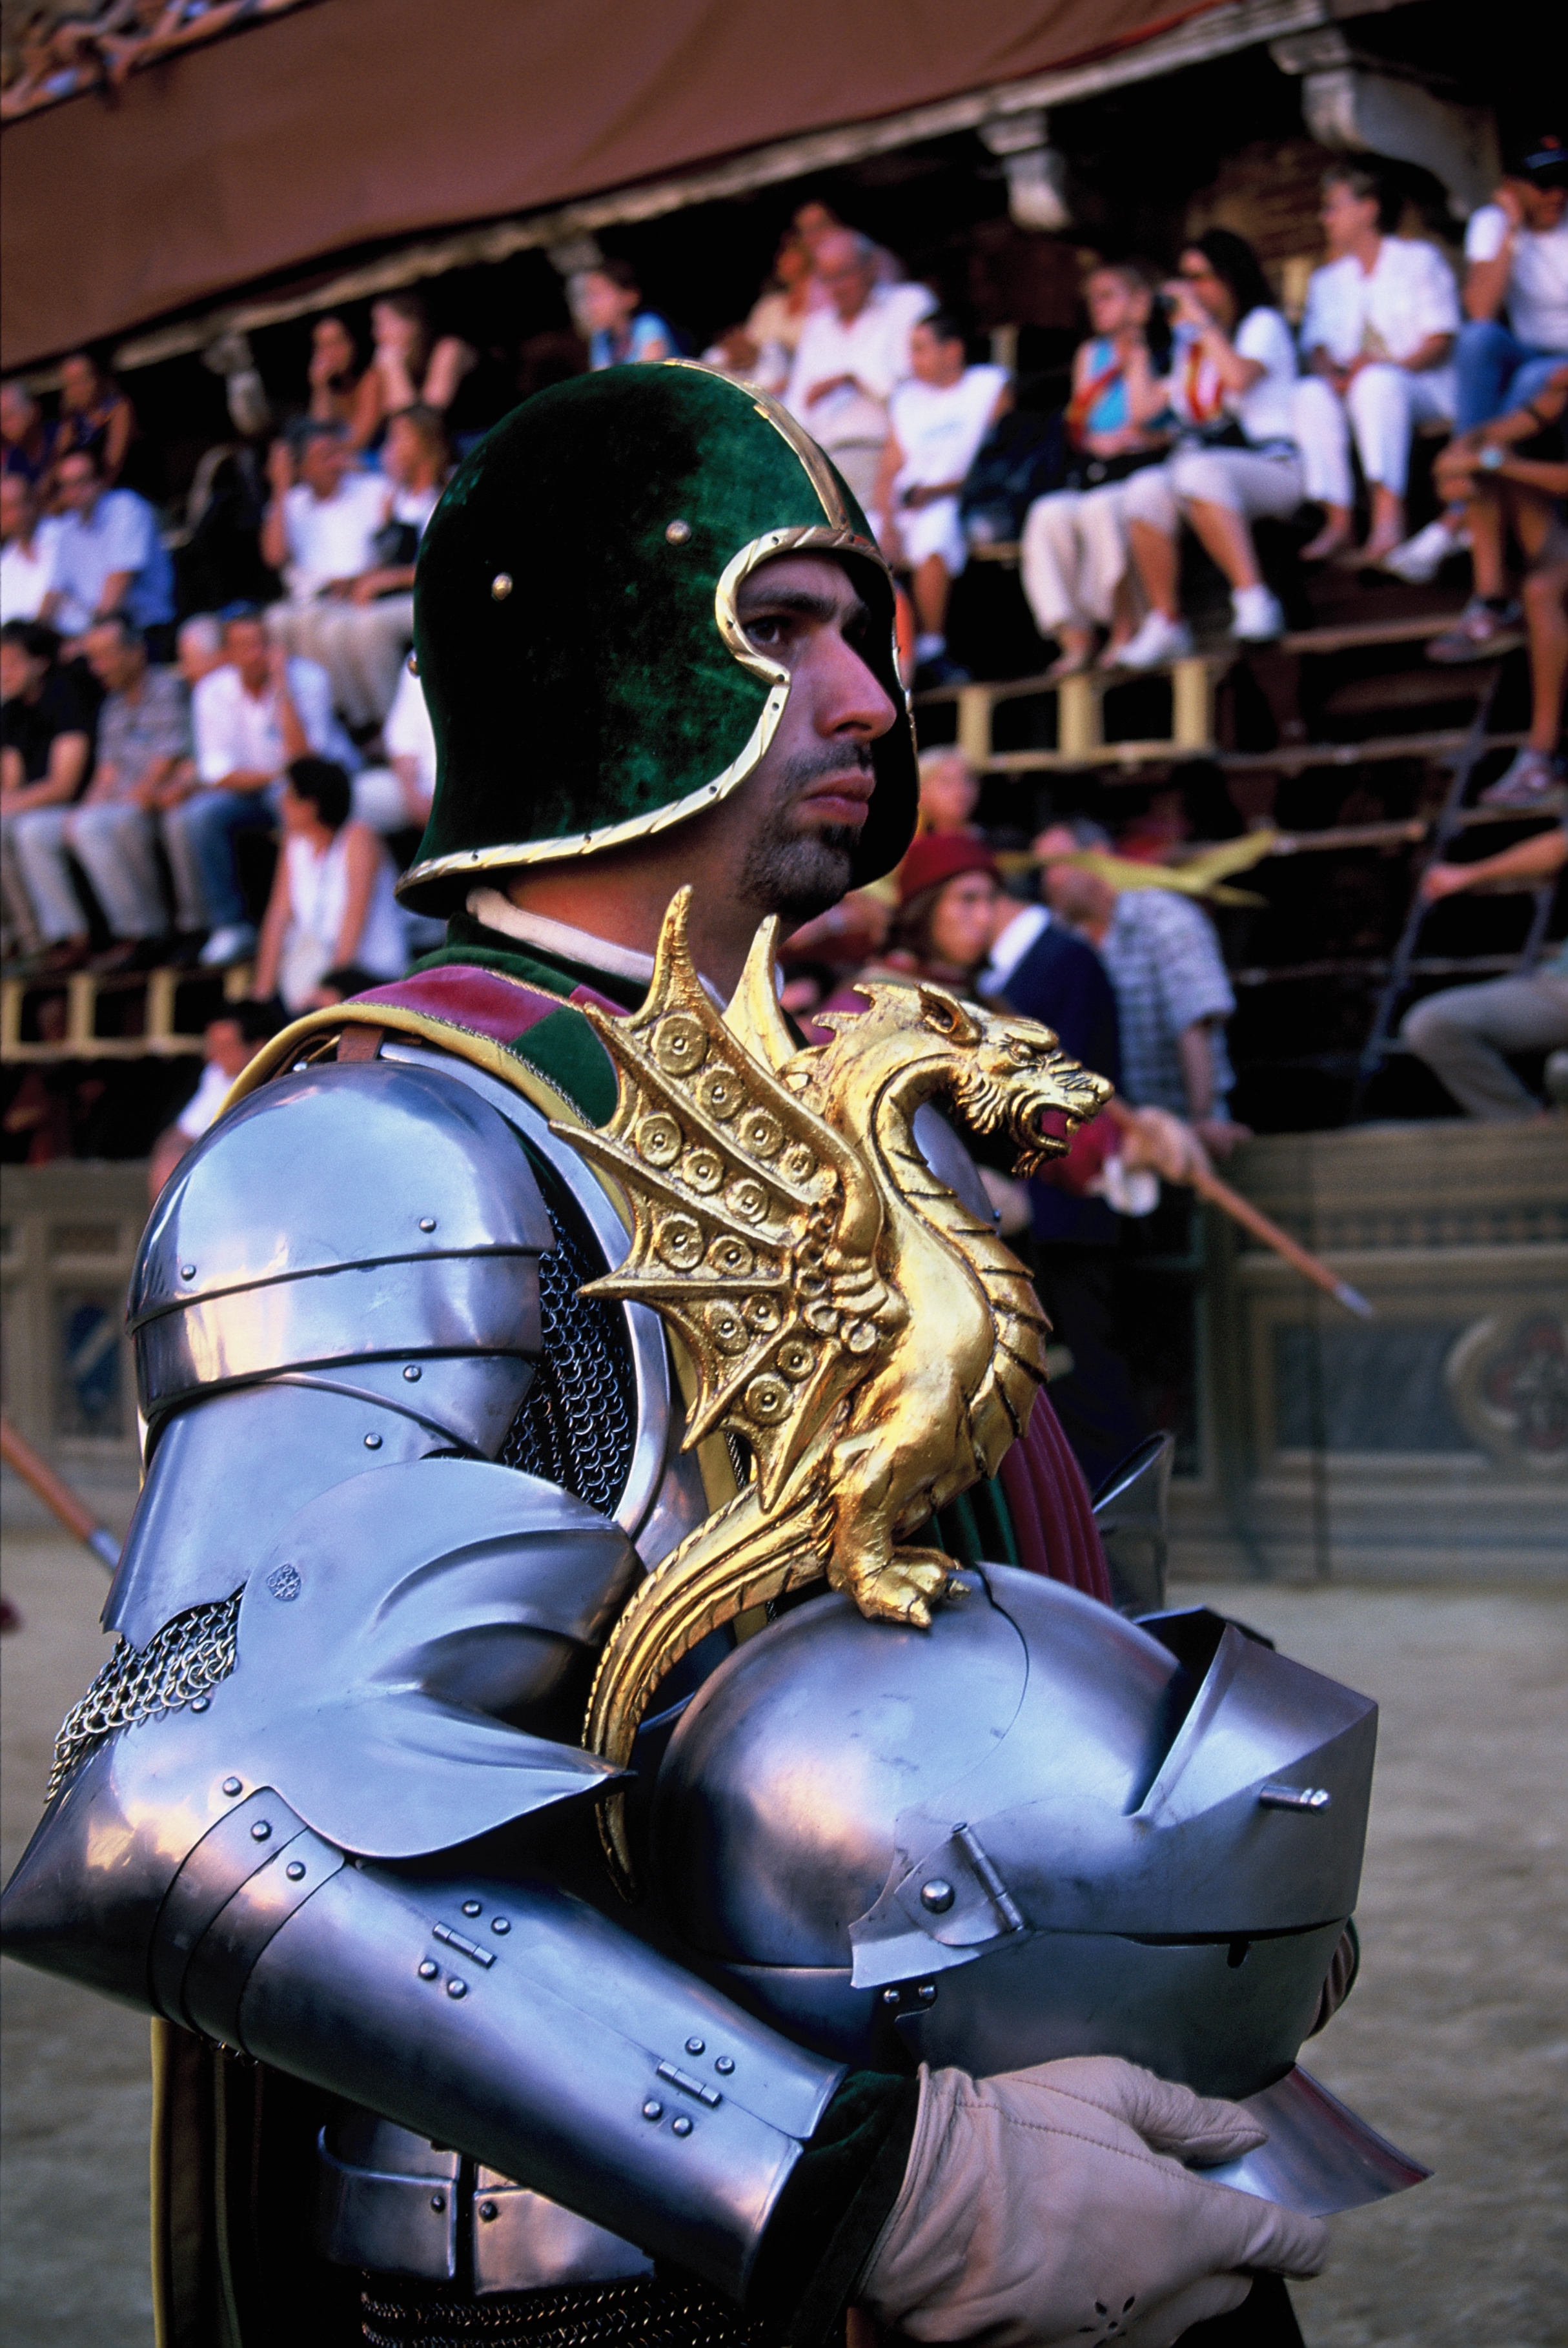 A knight pacing the track with intent